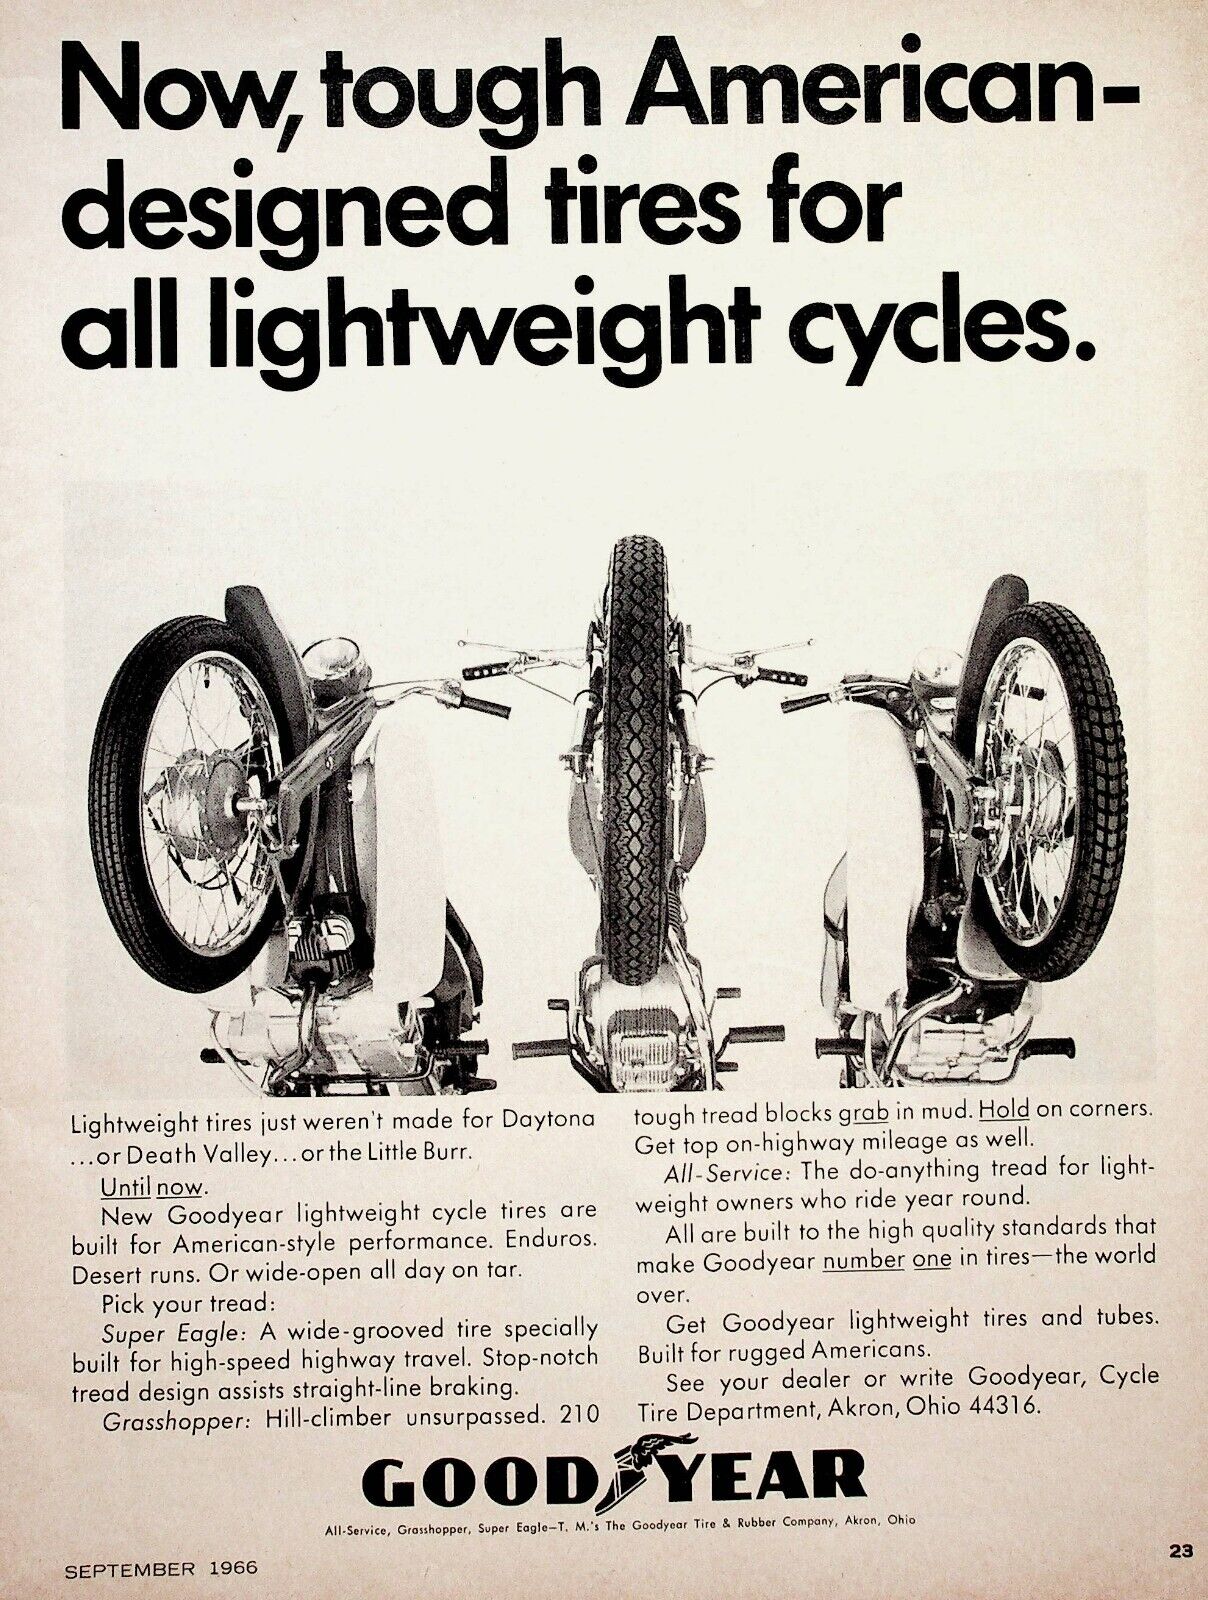 1966 Goodyear Lightweight Motorcycle Tires - Vintage Ad